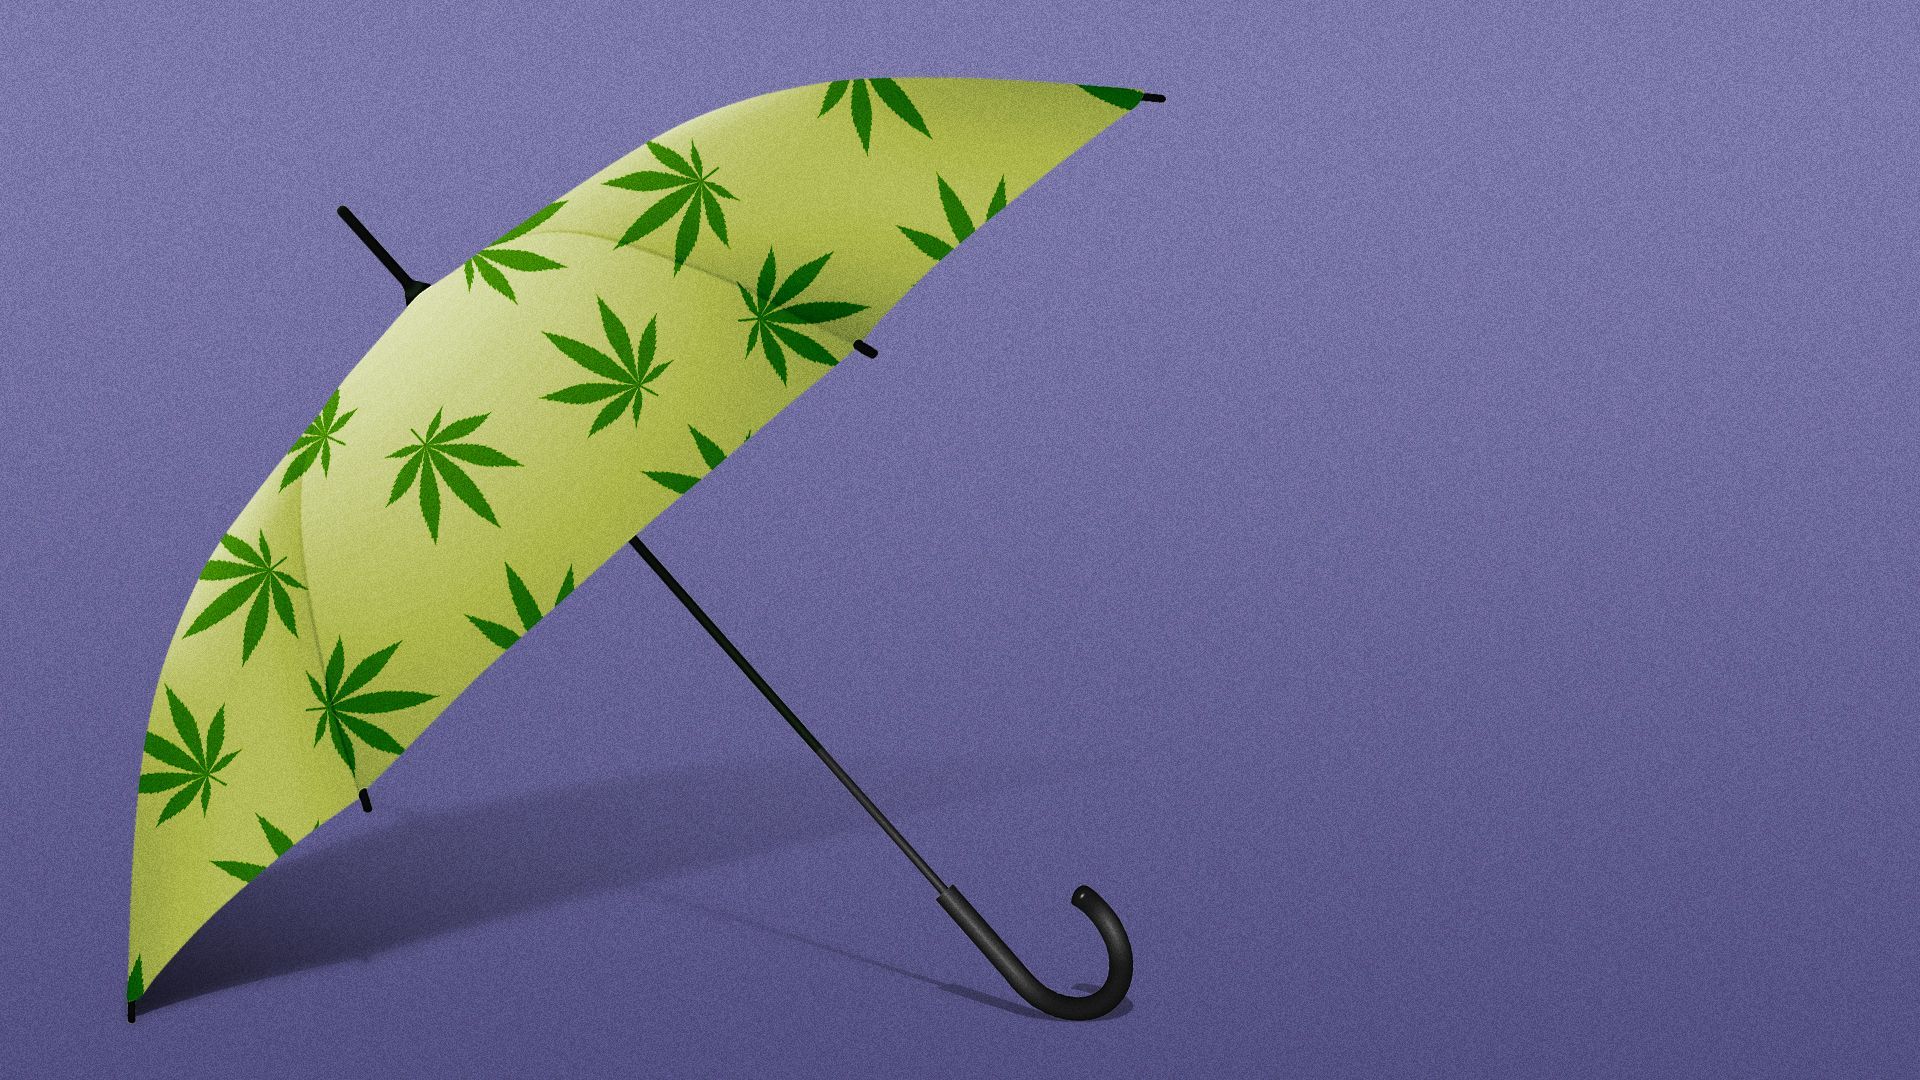 Illustration of an umbrella with a repeating pattern of marijuana leaves.